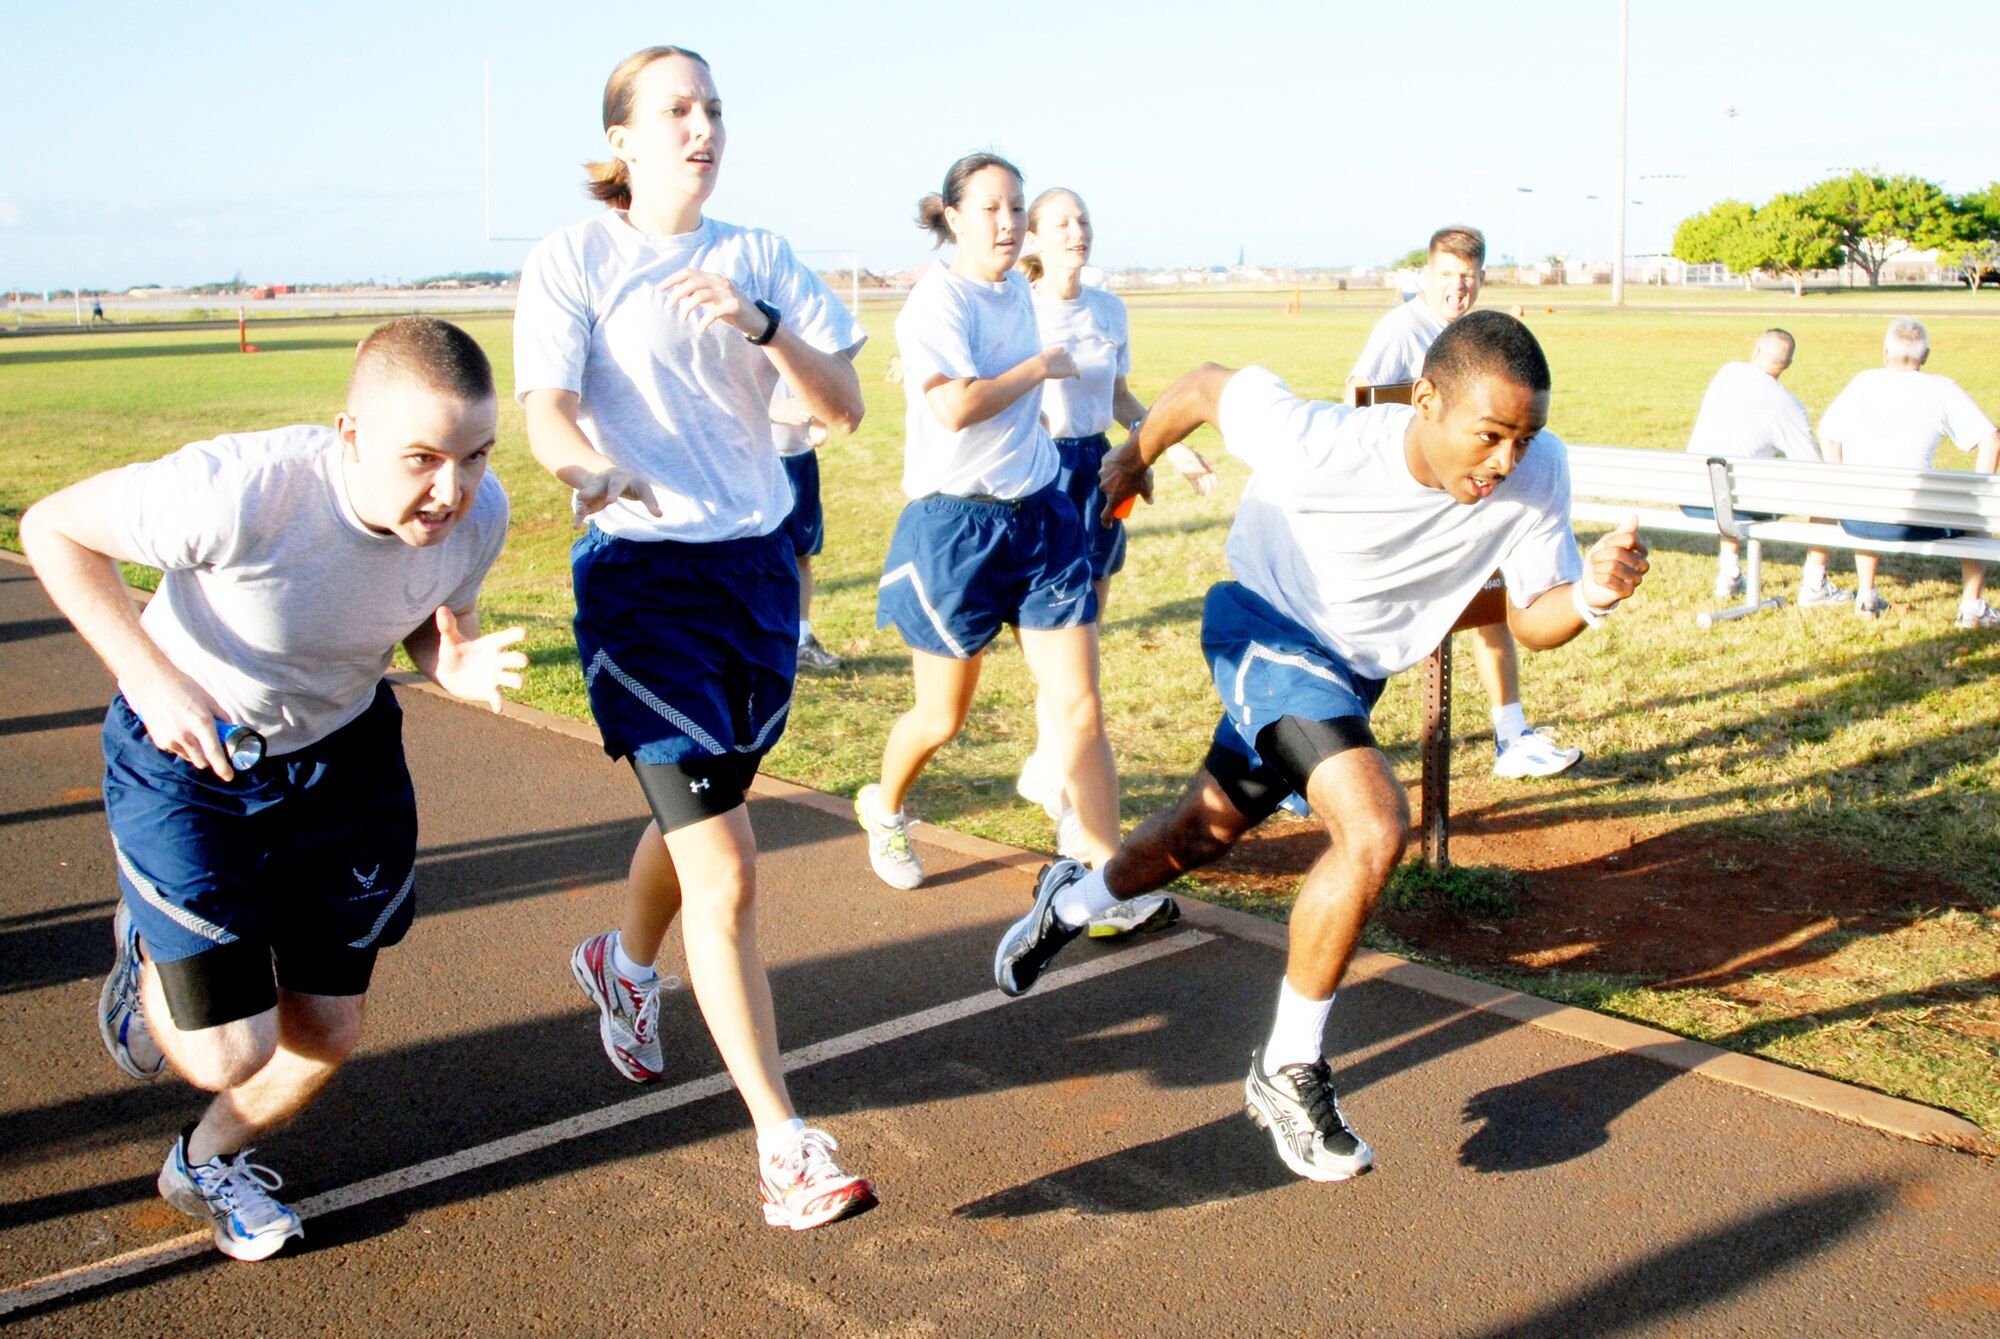 Members of 13th Air Force pass batons while competing in a relay race during Jungle Day Nov. 13, 2009, at Hickam Air Force Base, Hawaii. The Jungle Day tradition originated when the organization was assigned to Andersen AFB, Guam, and gives 13th Air Force members a chance to have fun and give back to the local community. (U.S. Air Force photo/Senior Airman Gustavo Gonzalez)